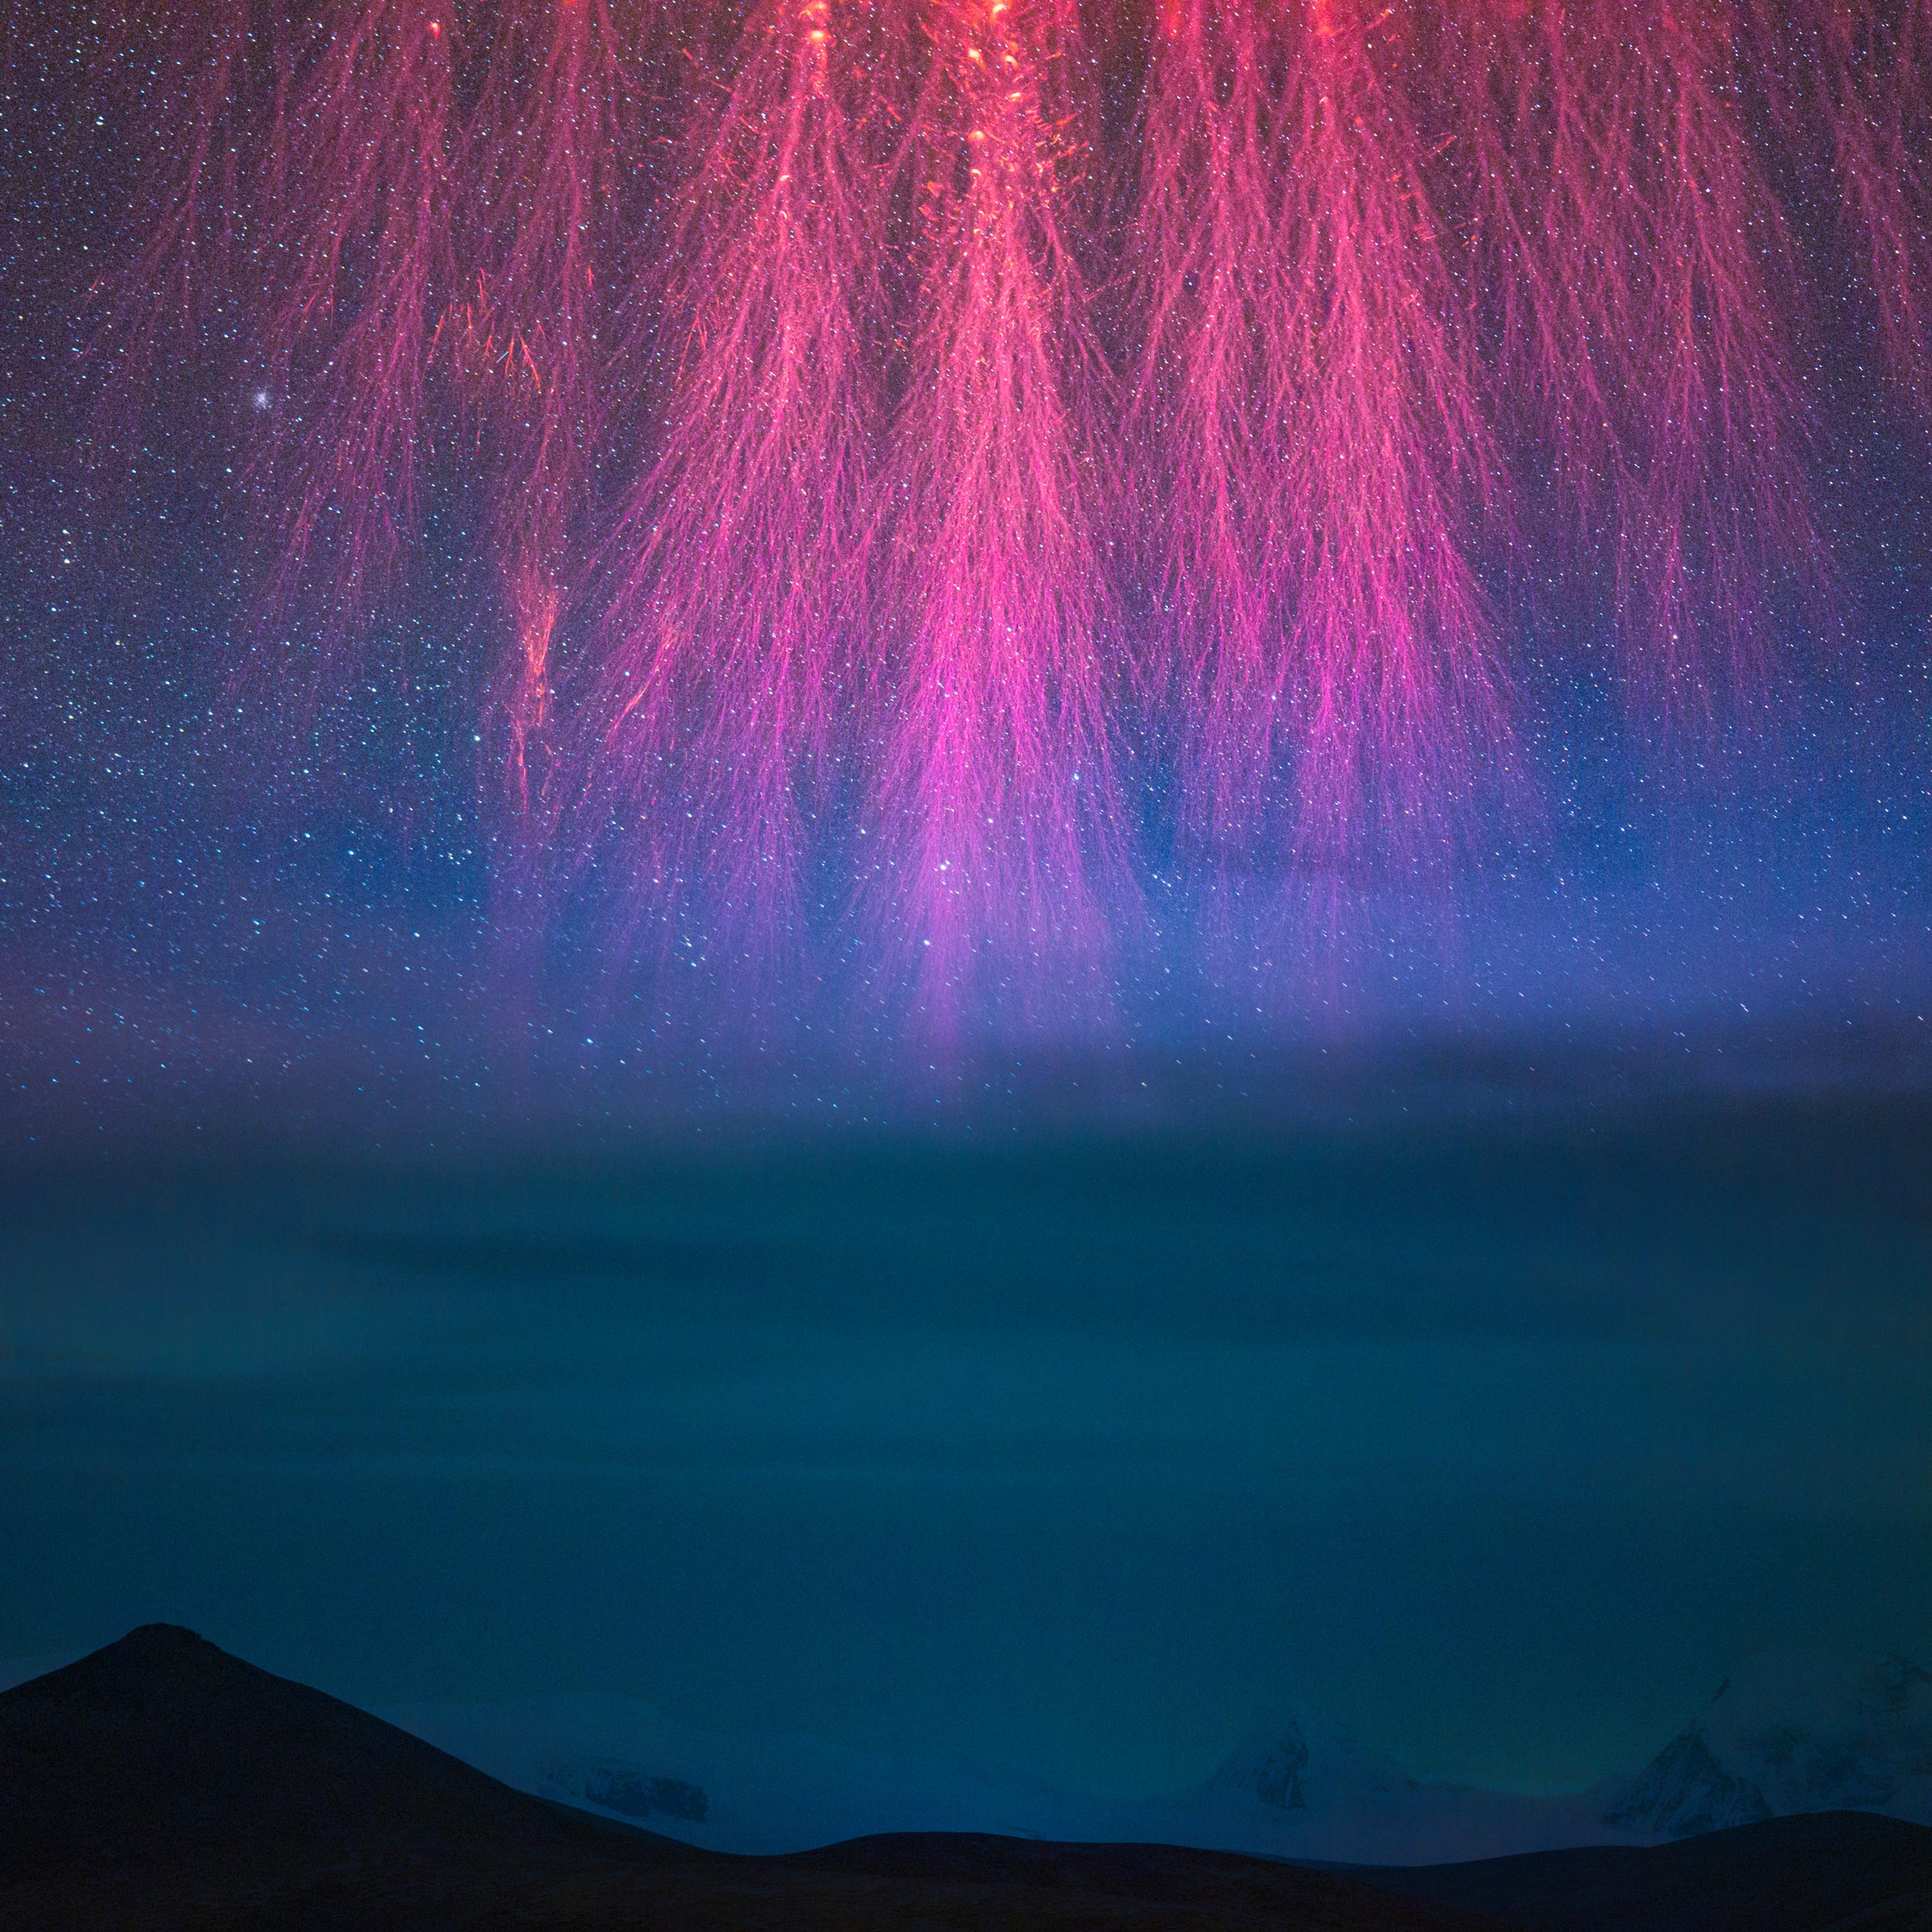 Pink firework-like sprites against a starry sky.